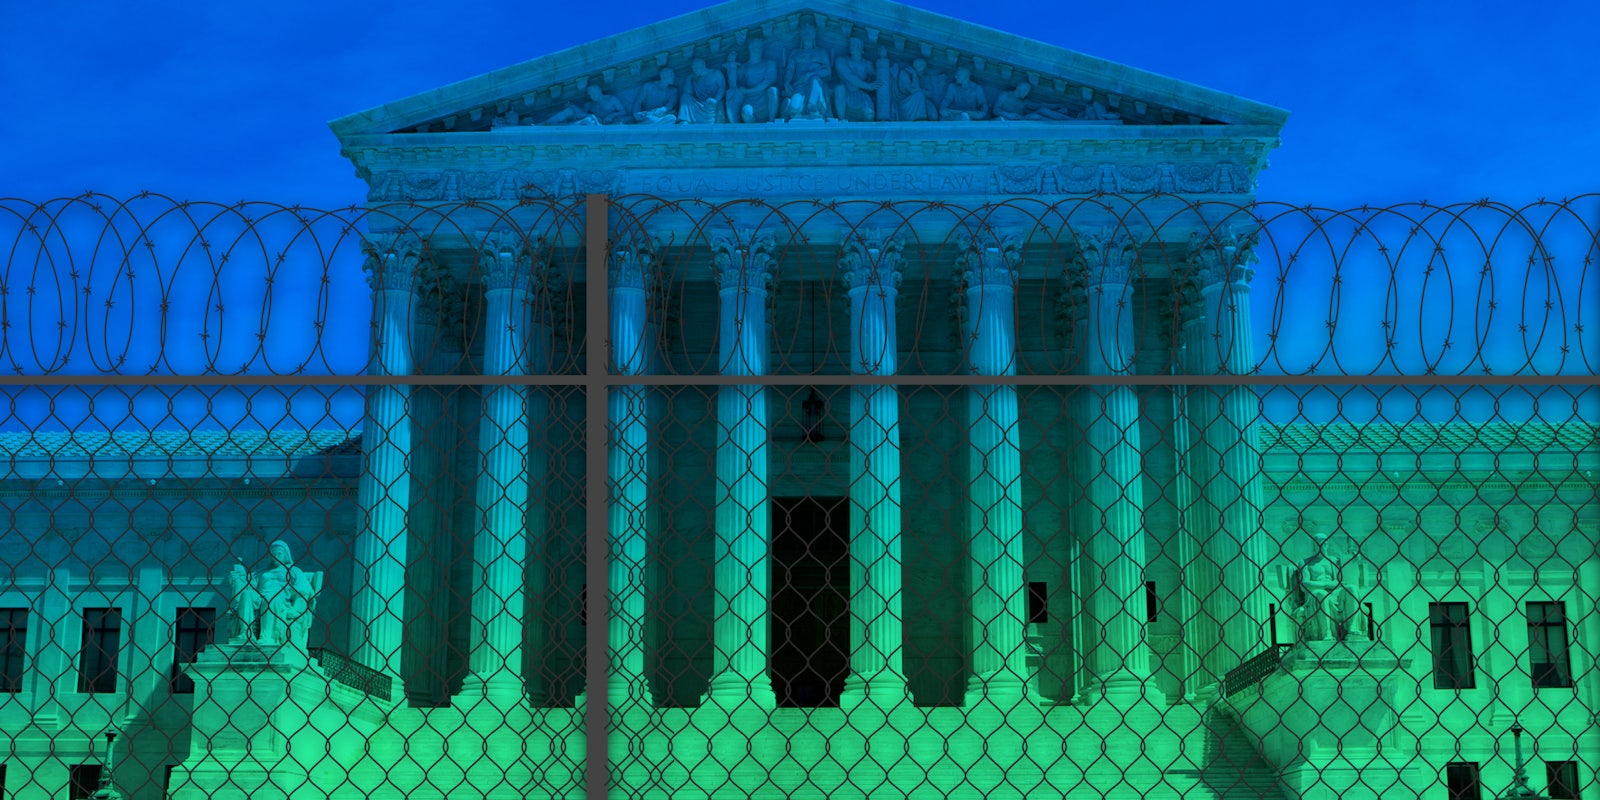 Supreme court with fence in front of it